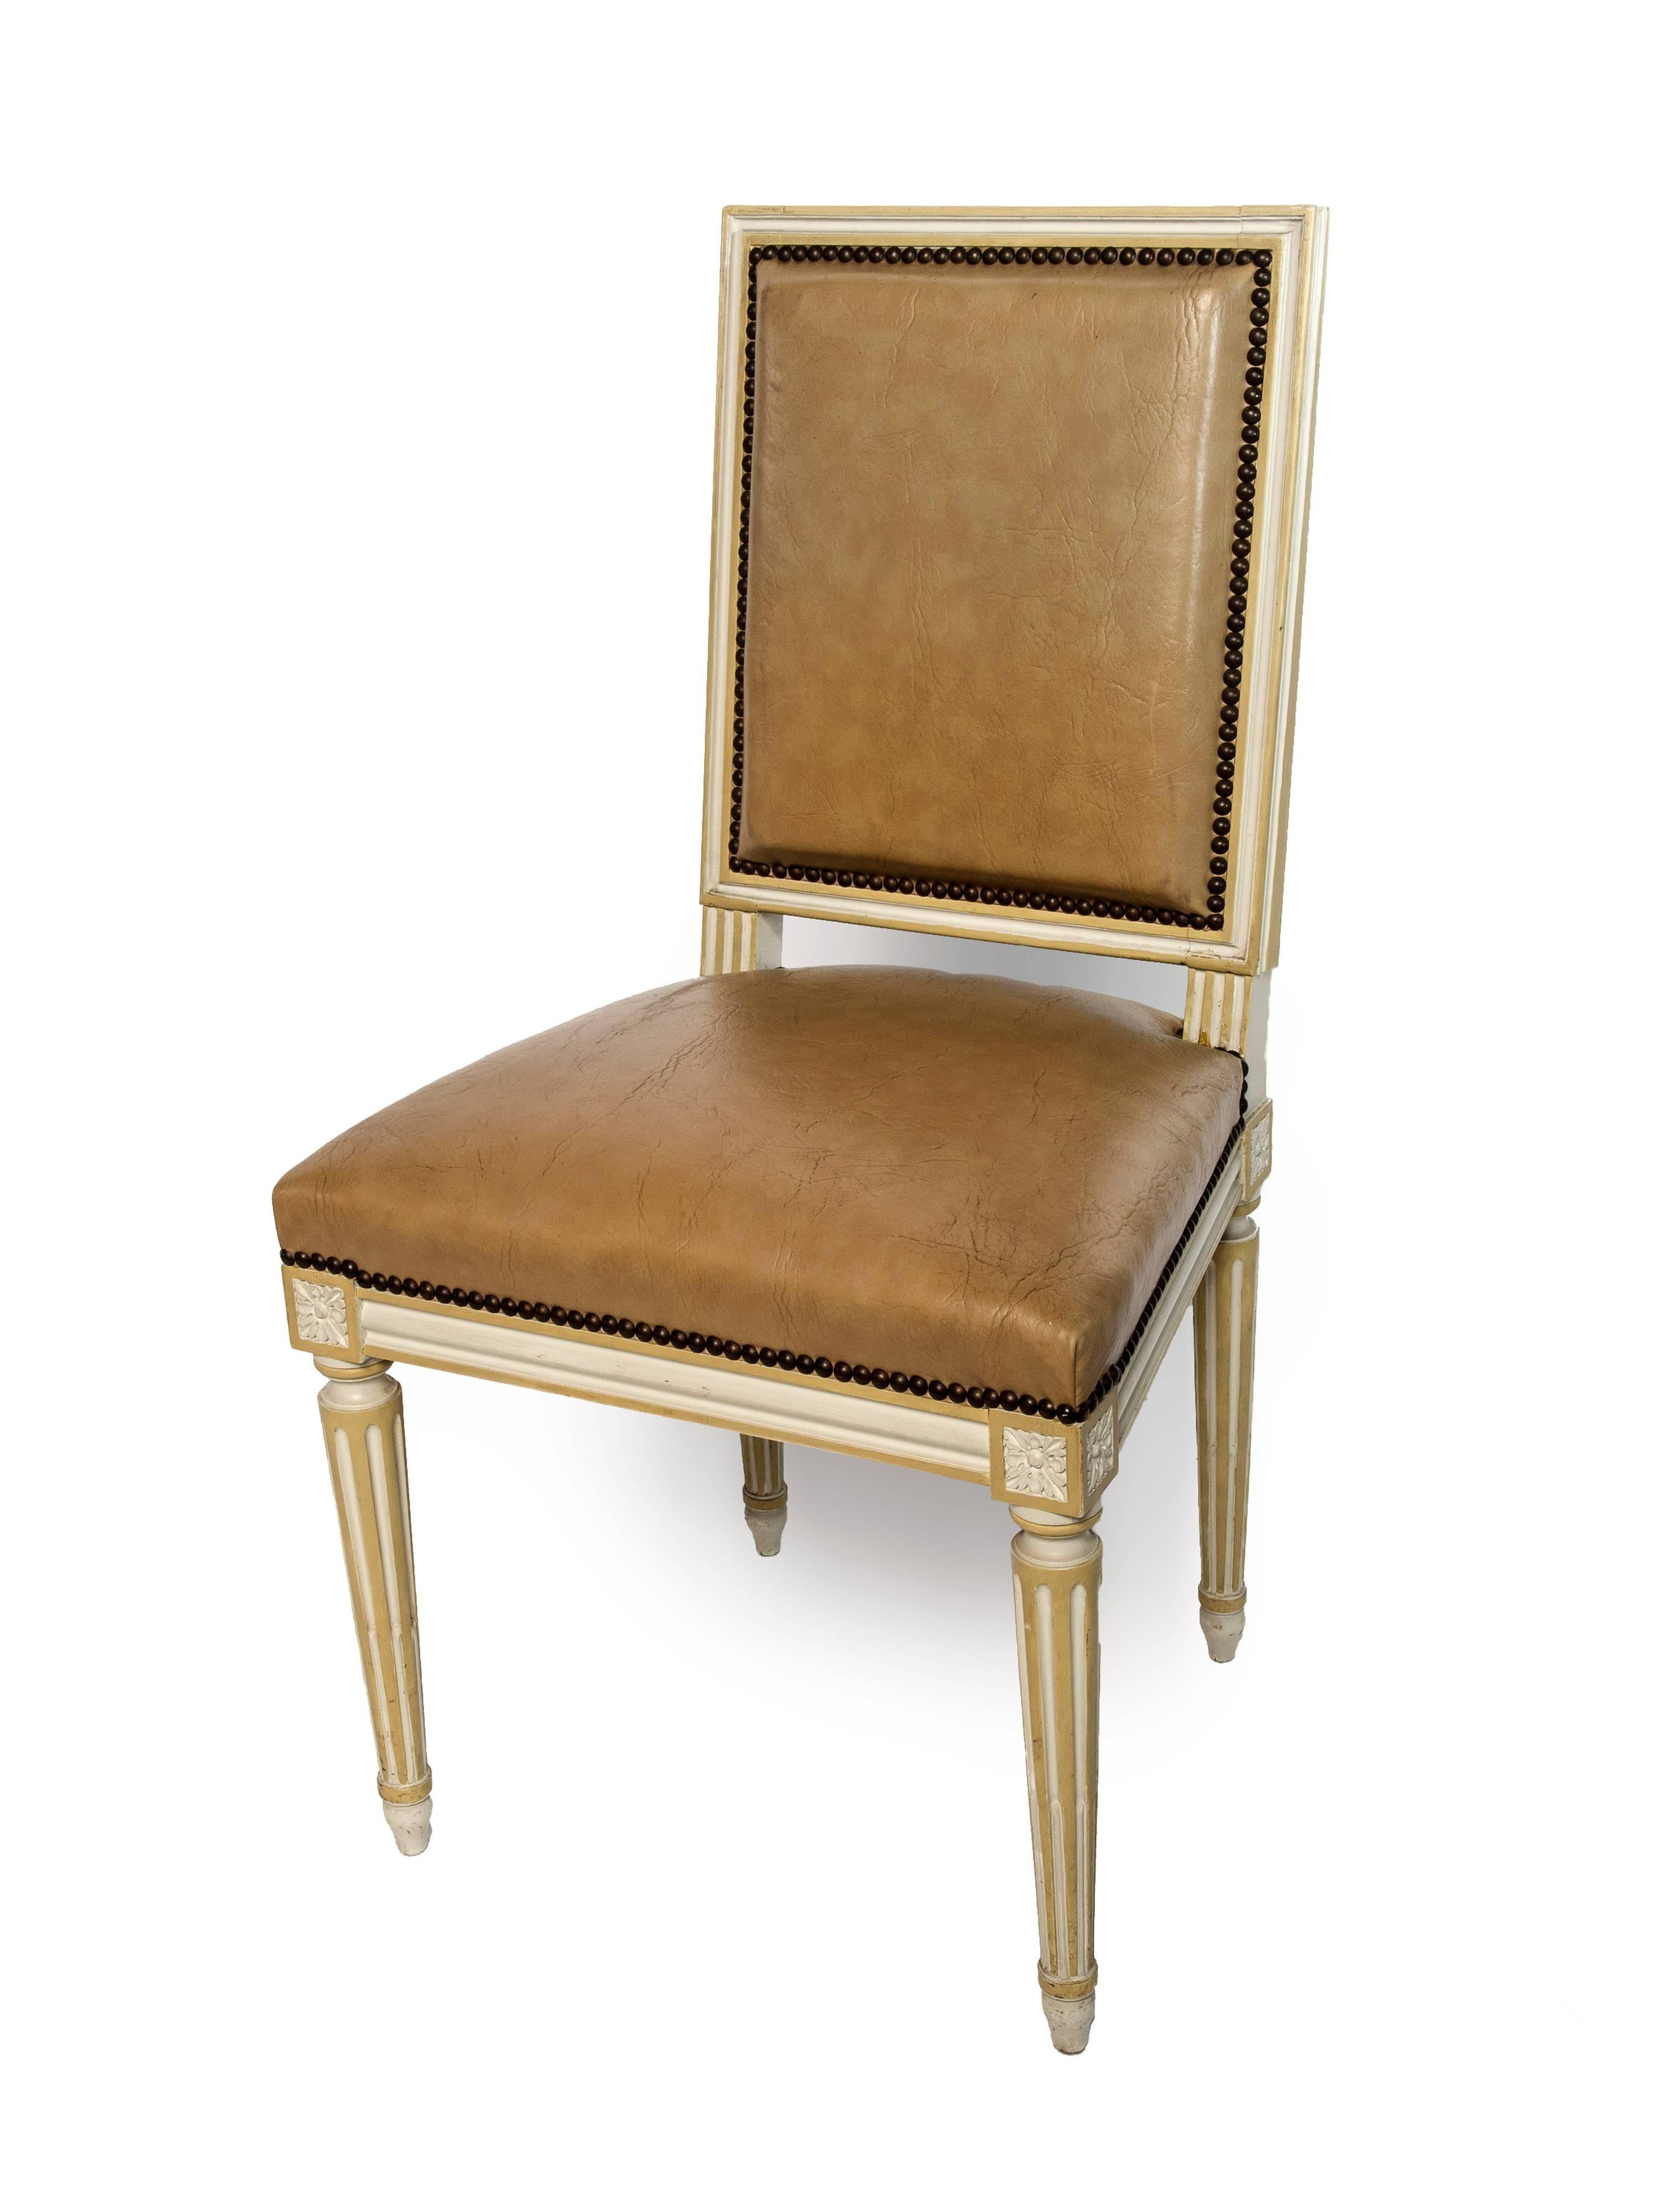 Set of four square back Louis XVI dining chairs covered in a tan leather.